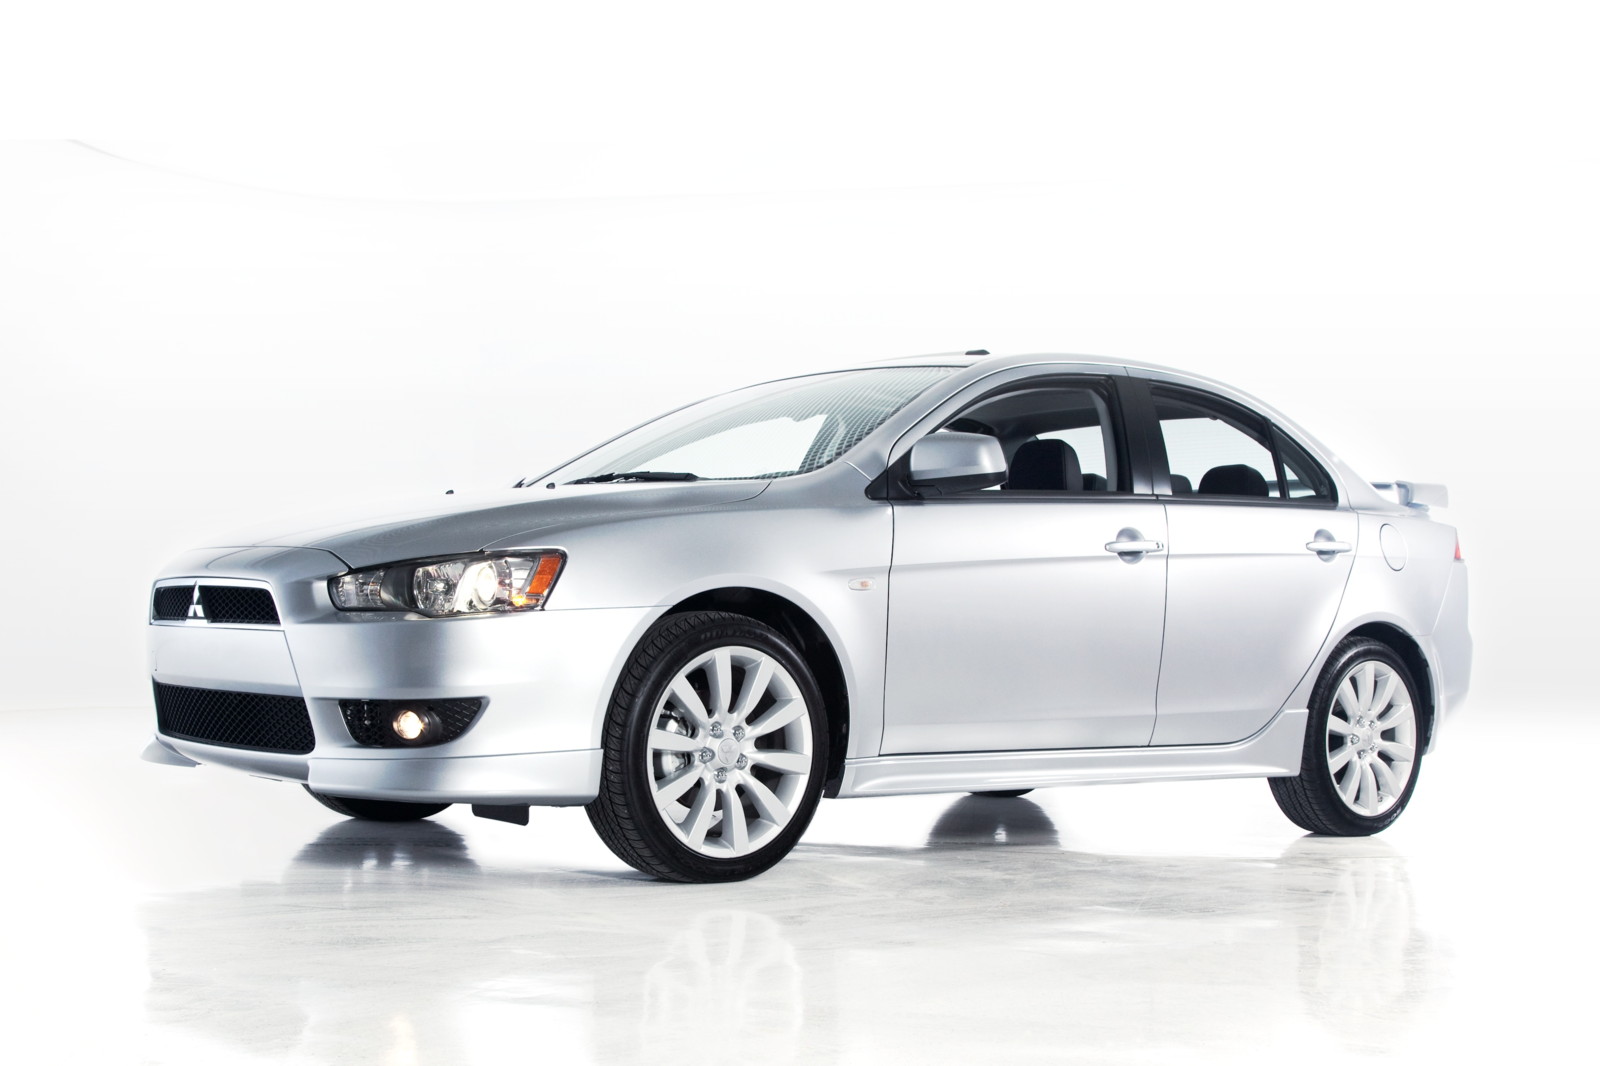 2010 Mitsubishi Lancer Review, Ratings, Specs, Prices, and Photos ...